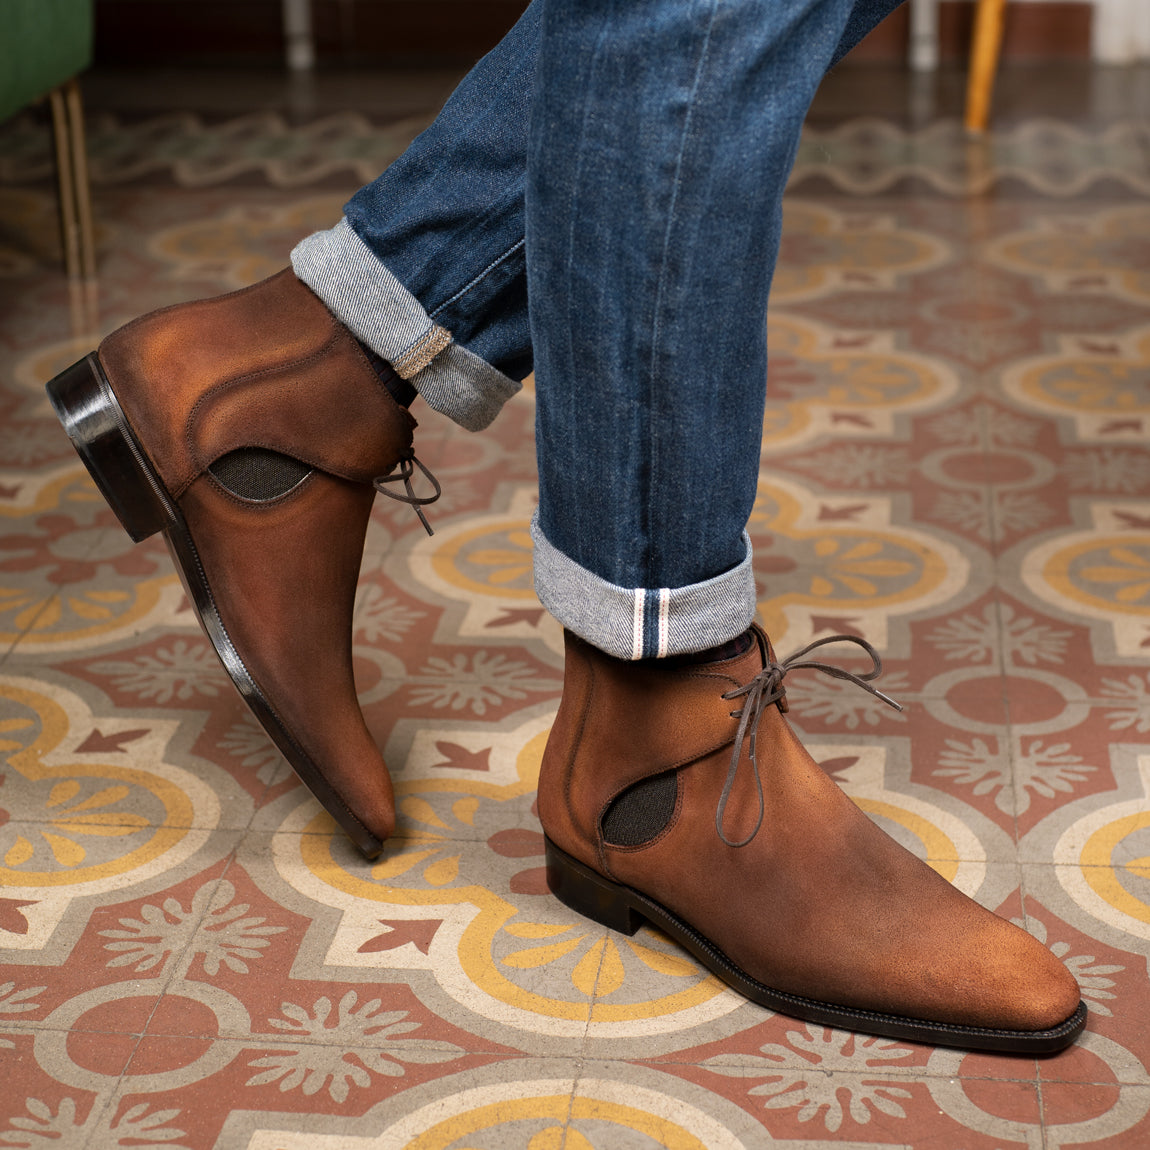 Decon Chelsea Boots by Norman Vilalta Goodyear-welted Chelsea Boots in Barcelona, Spain